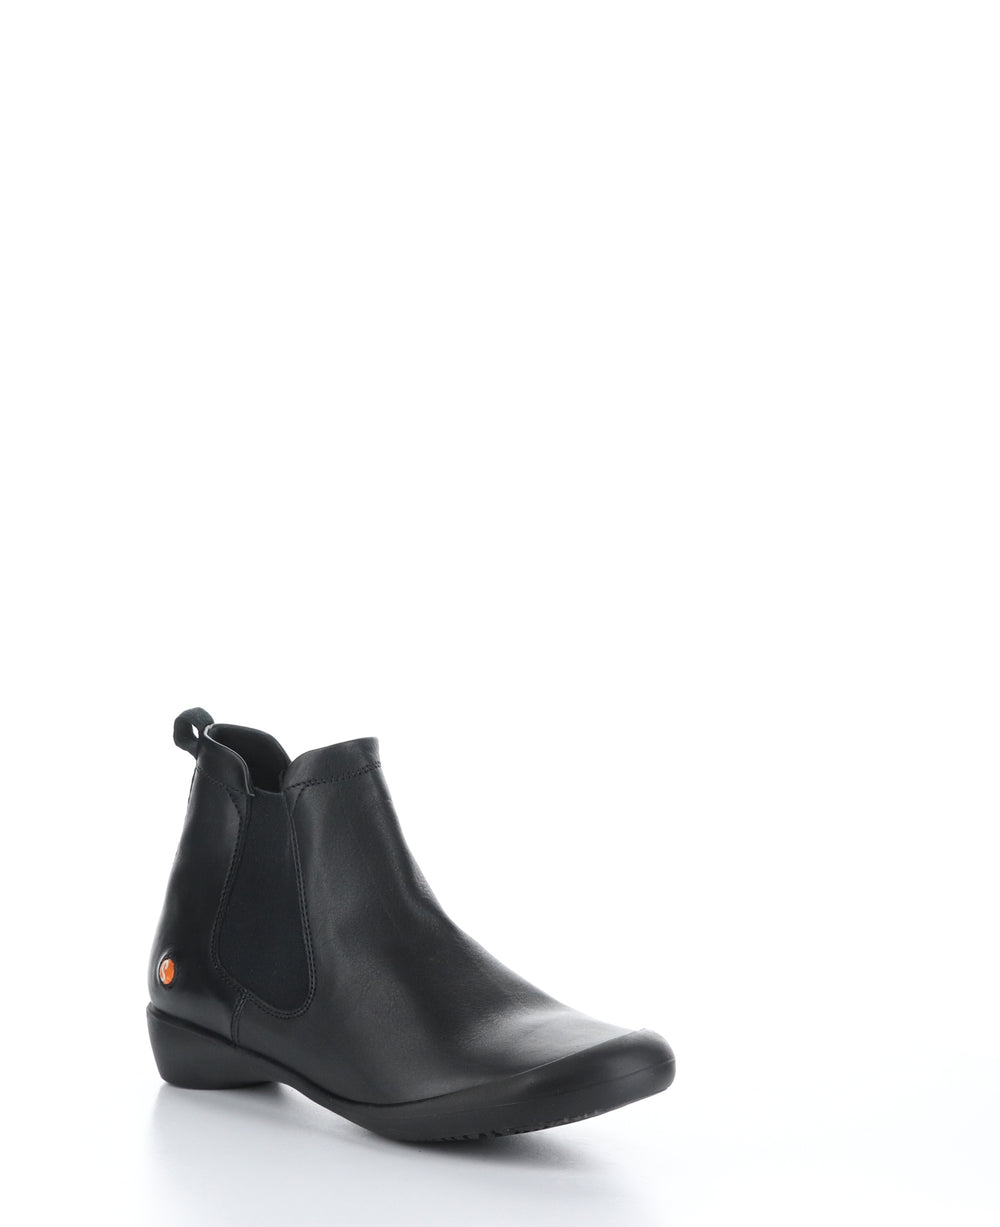 FARY630SOF Black Round Toe Ankle Boots